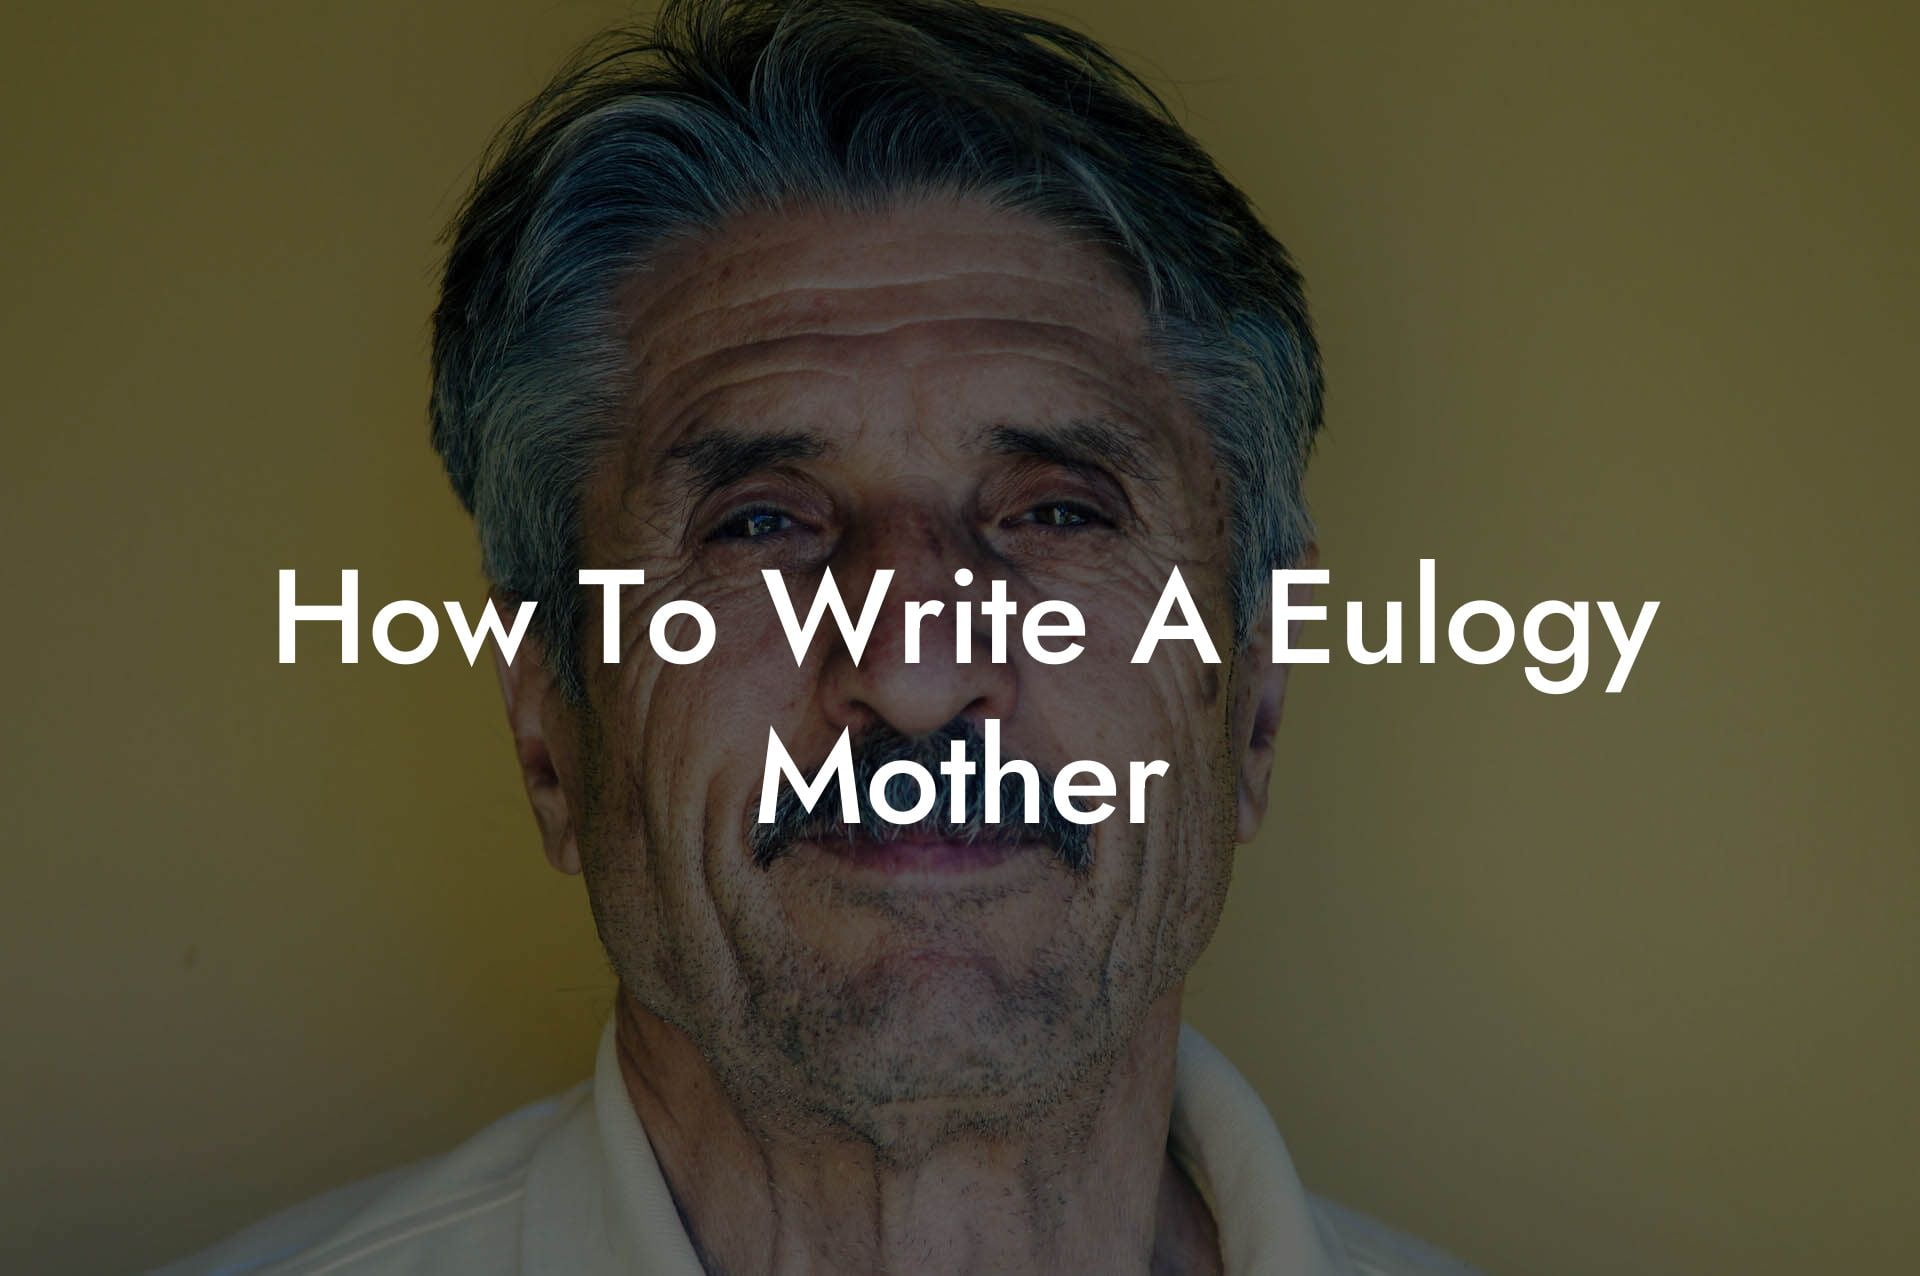 How To Write A Eulogy Mother